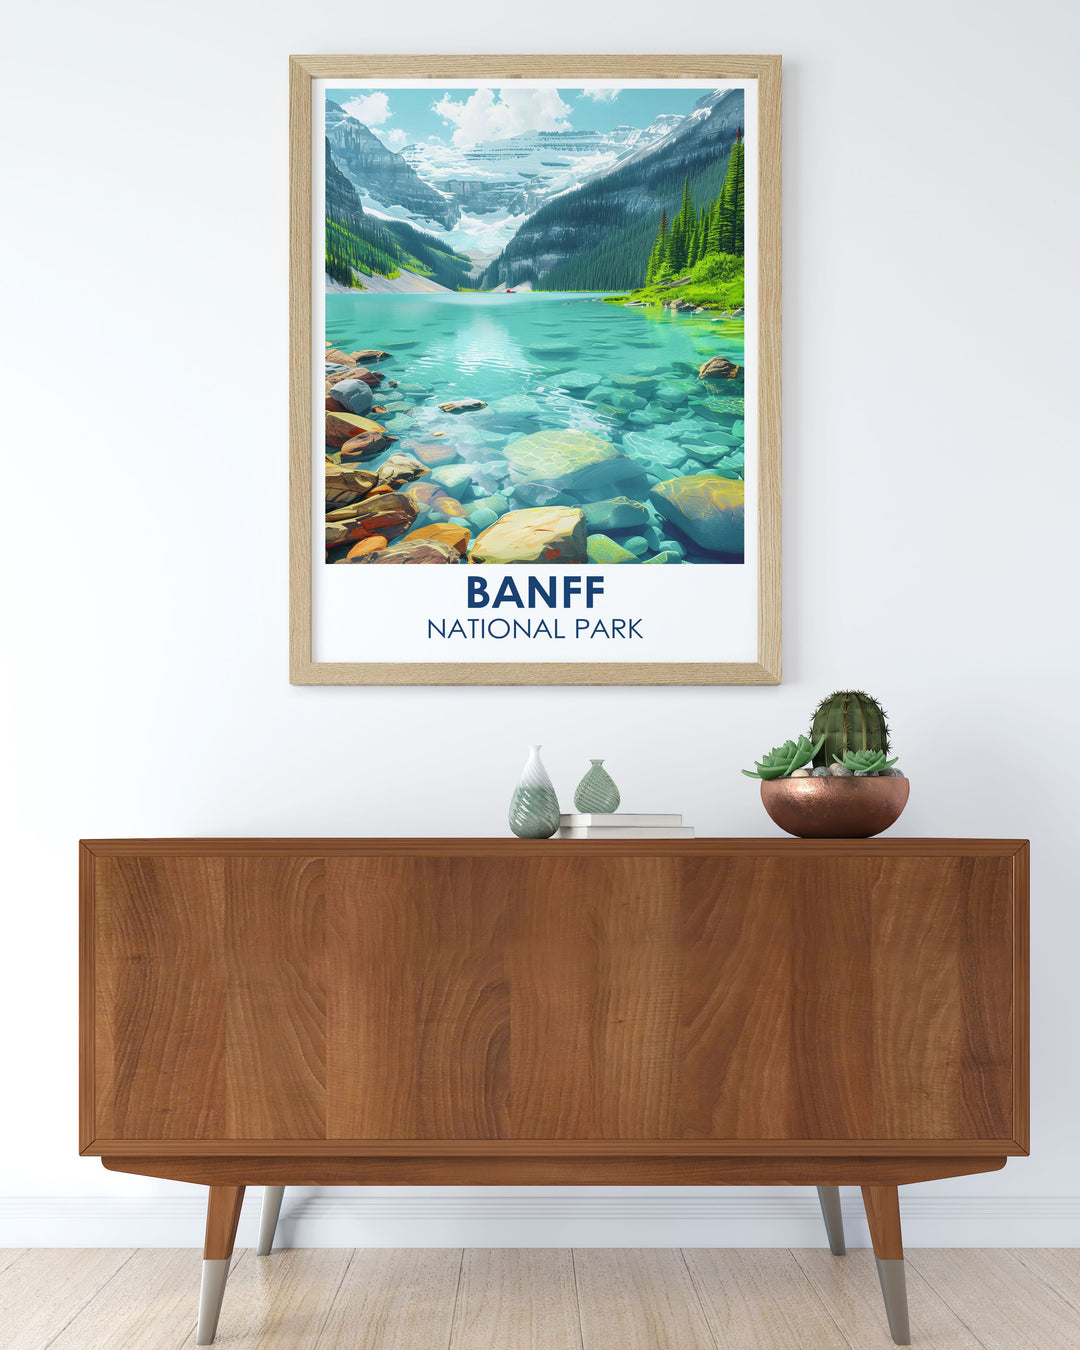 Canadian Rockies canvas print illustrating the towering peaks and verdant forests, bringing the adventure and spirit of the outdoors into your home or office environment.